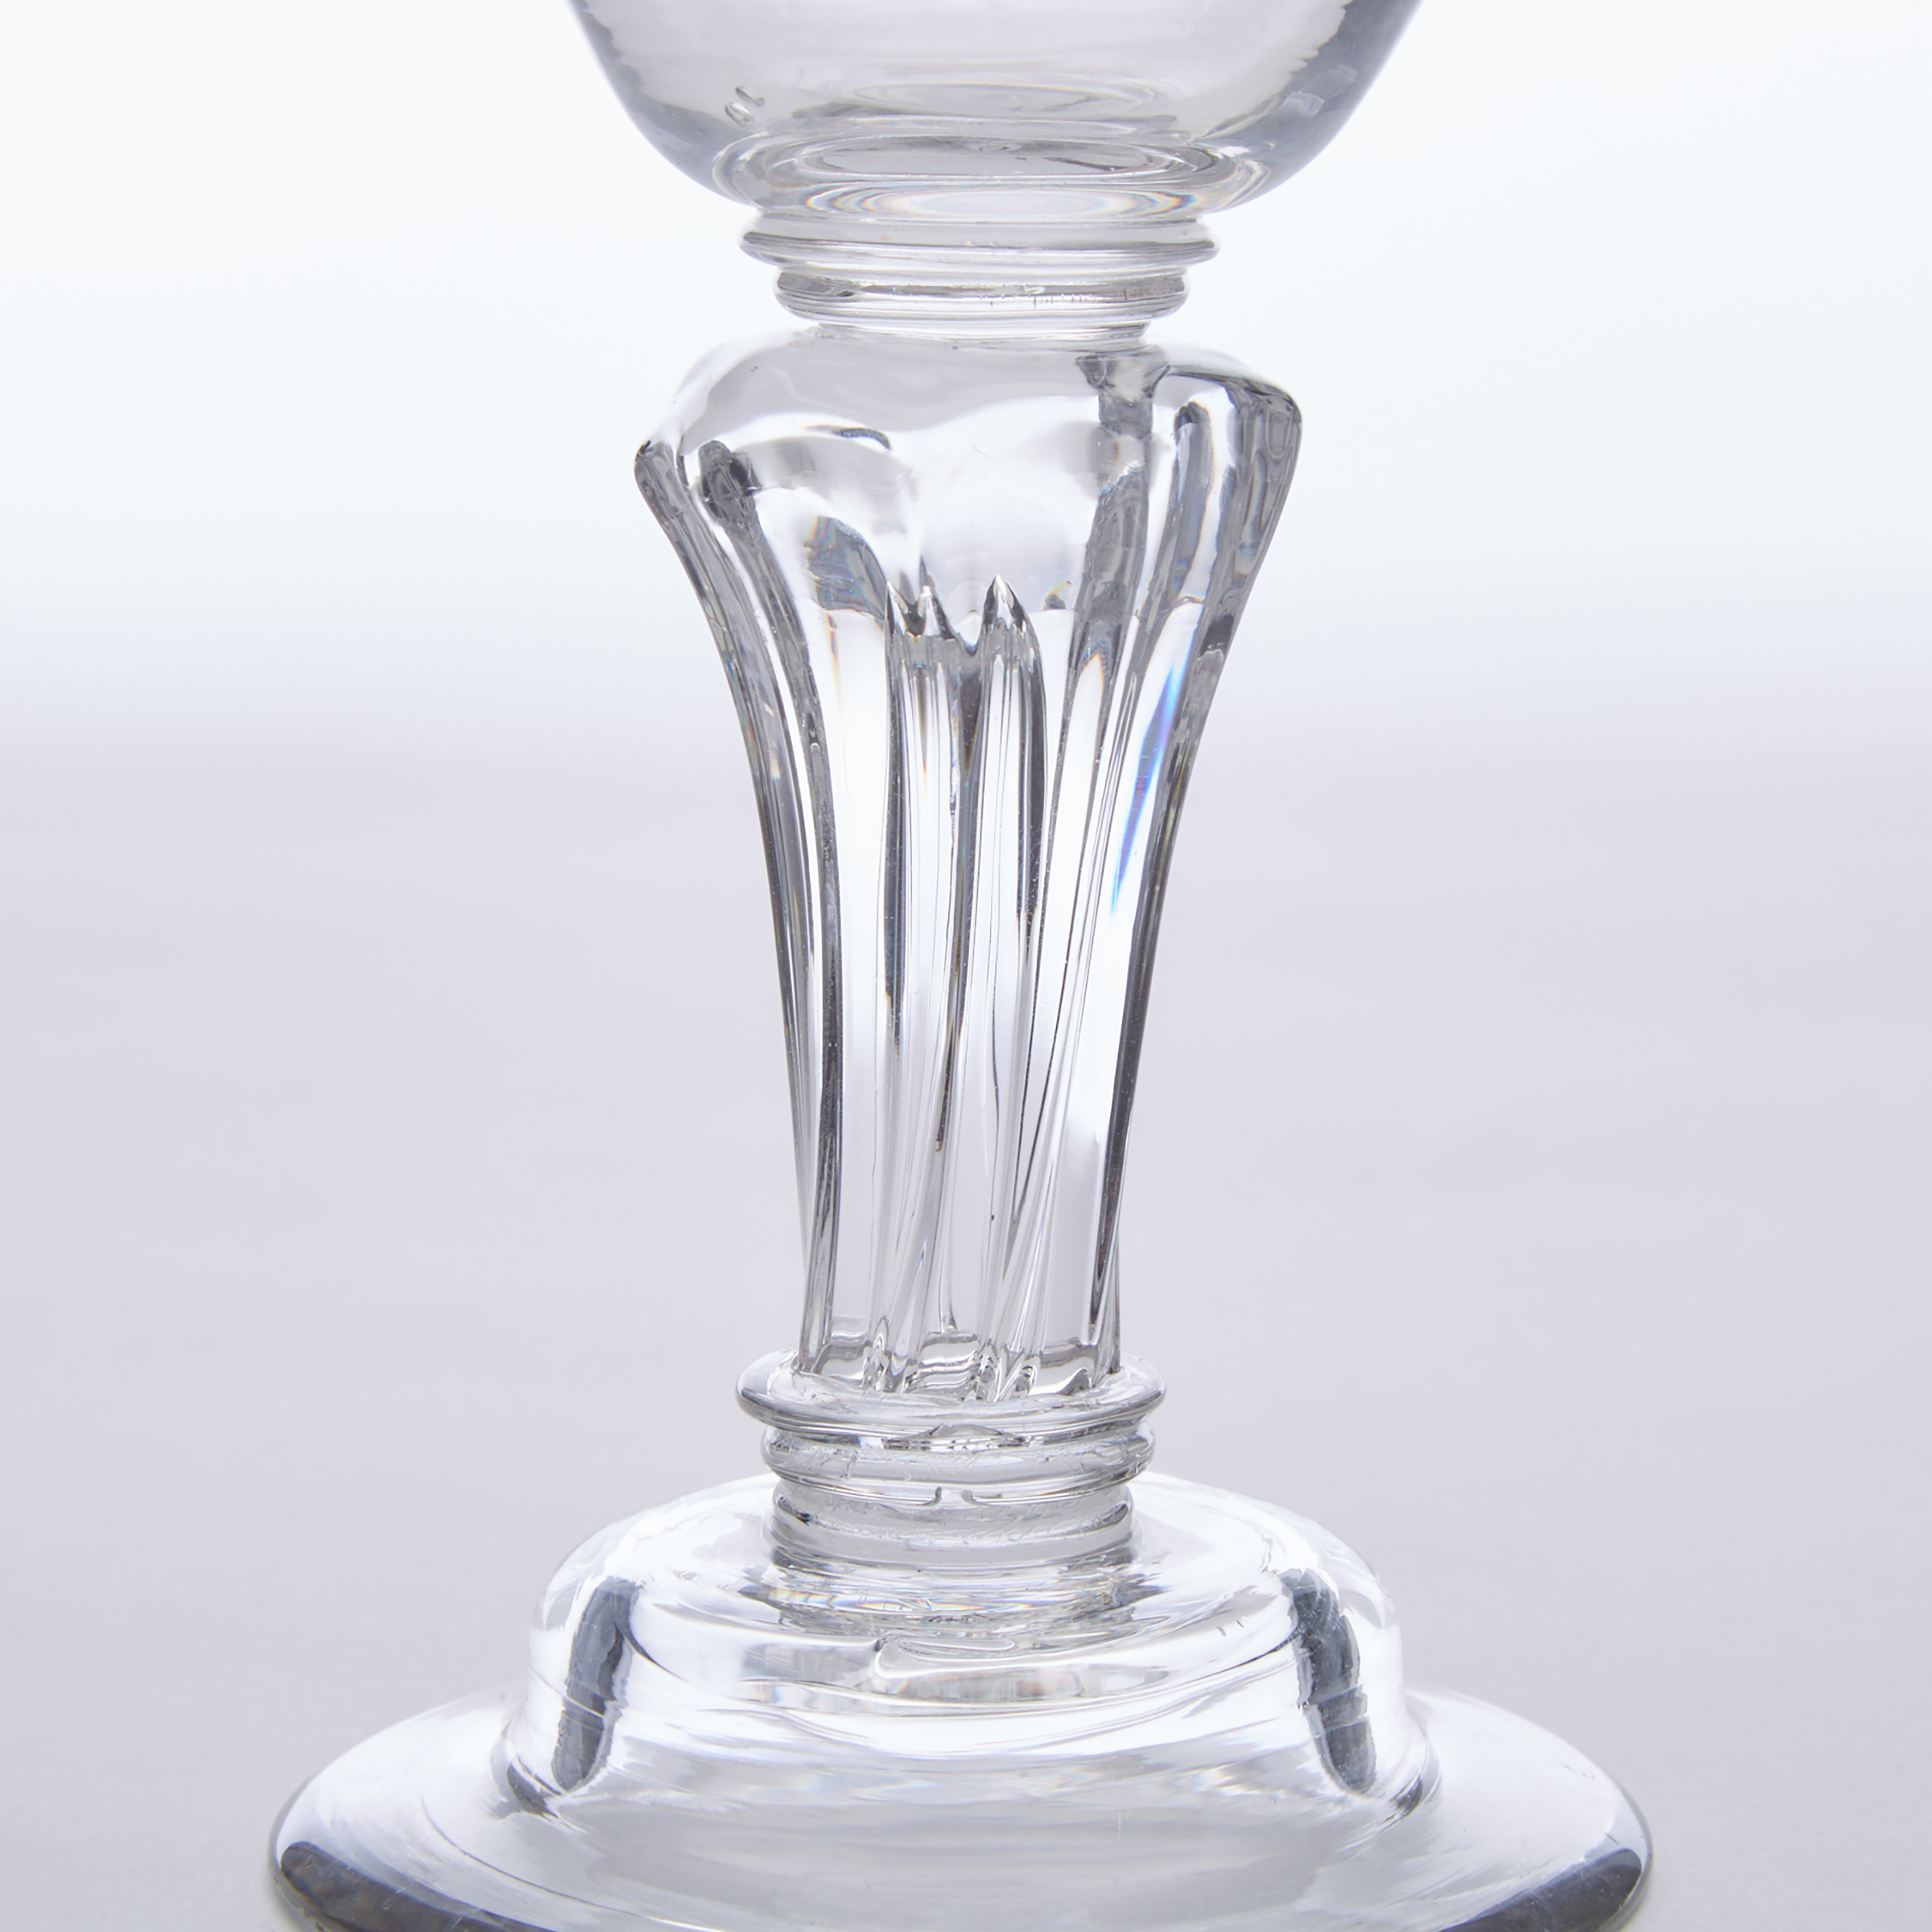 English Moulded Pedestal Stemmed Sweetmeat or Champagne Glass, mid-18th century